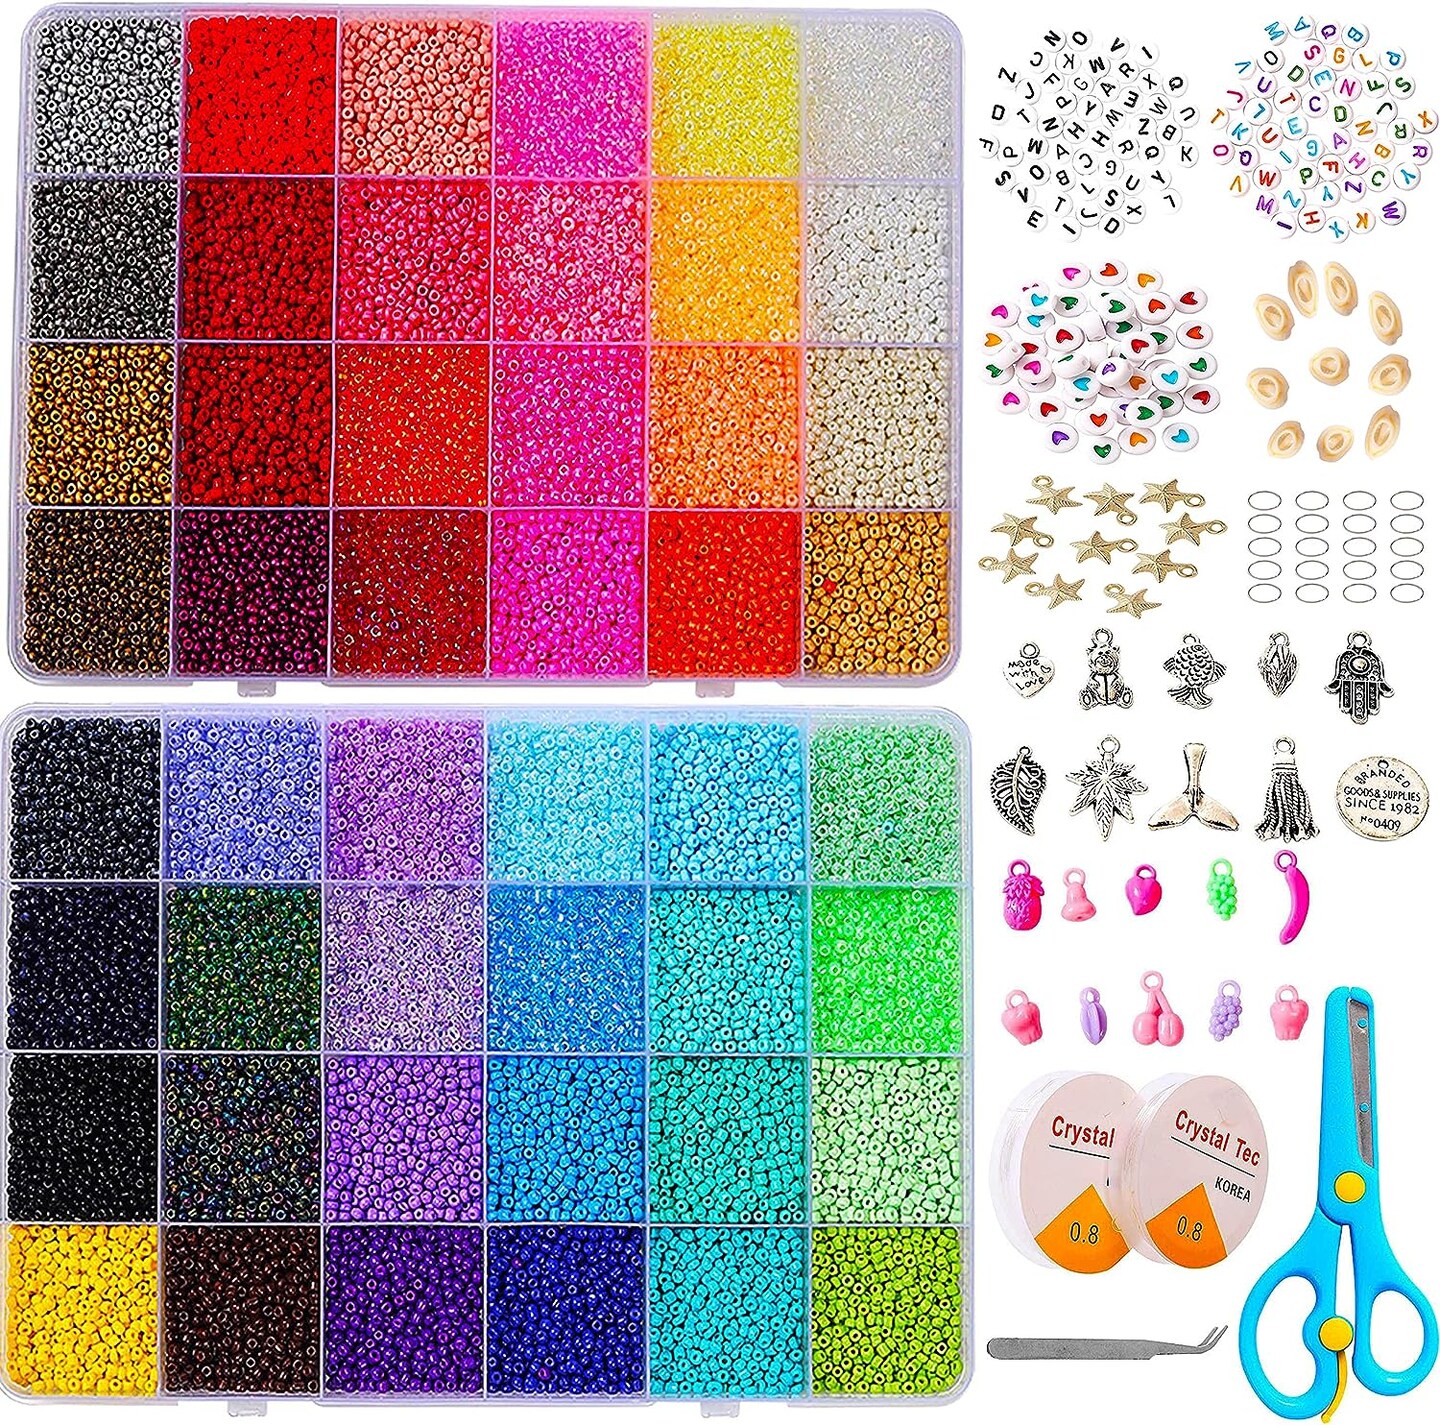 36000+pcs 2mm 48 Colors Glass Seed Beads for Bracelet Jewelry Making Kit, Beads Assortments Kit for Adults Girls Small Beads for Necklace Ring Making | Top Best Birthday Gifts